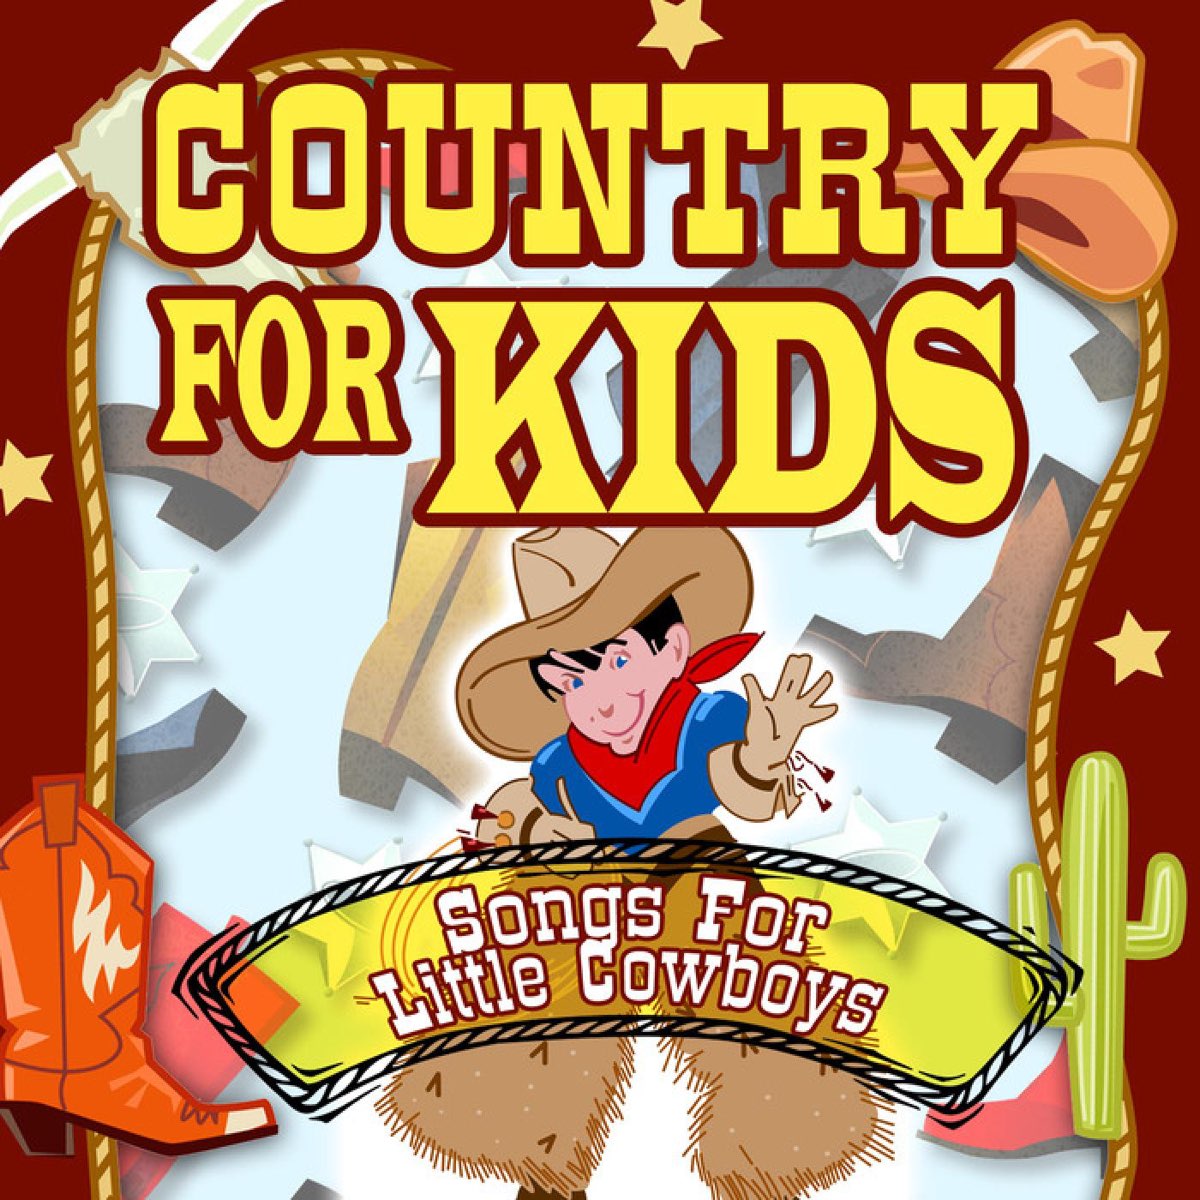 Little cowboy ready to go. Cowboy Song for Kids. Countries Songs for Kids. Countries for Kids.